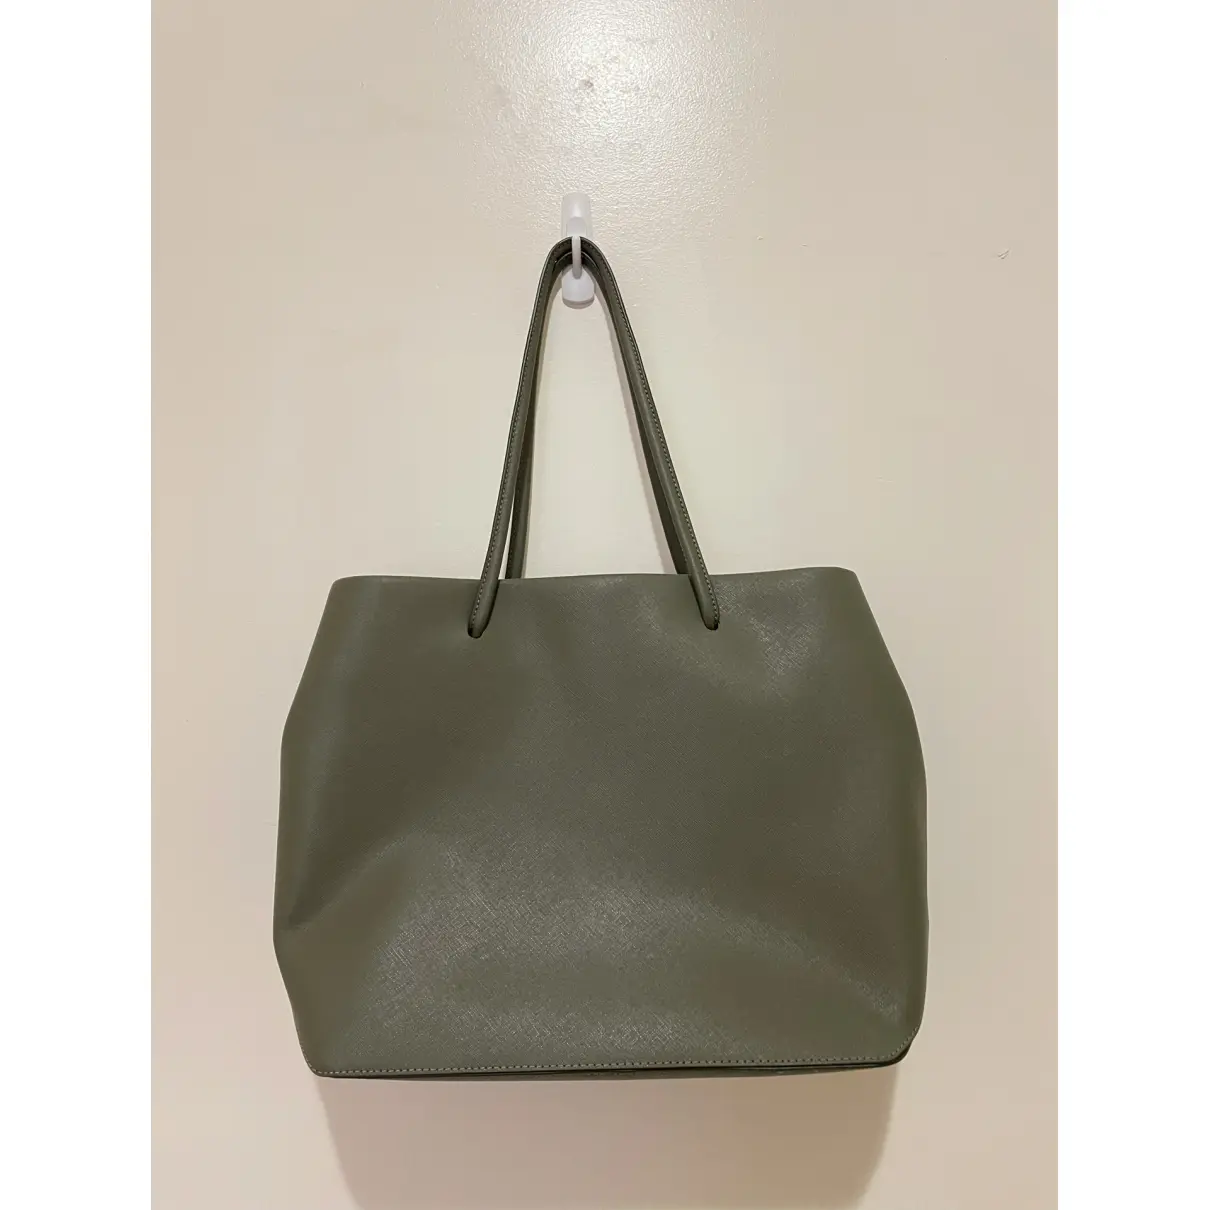 Buy Marc Jacobs Leather tote online